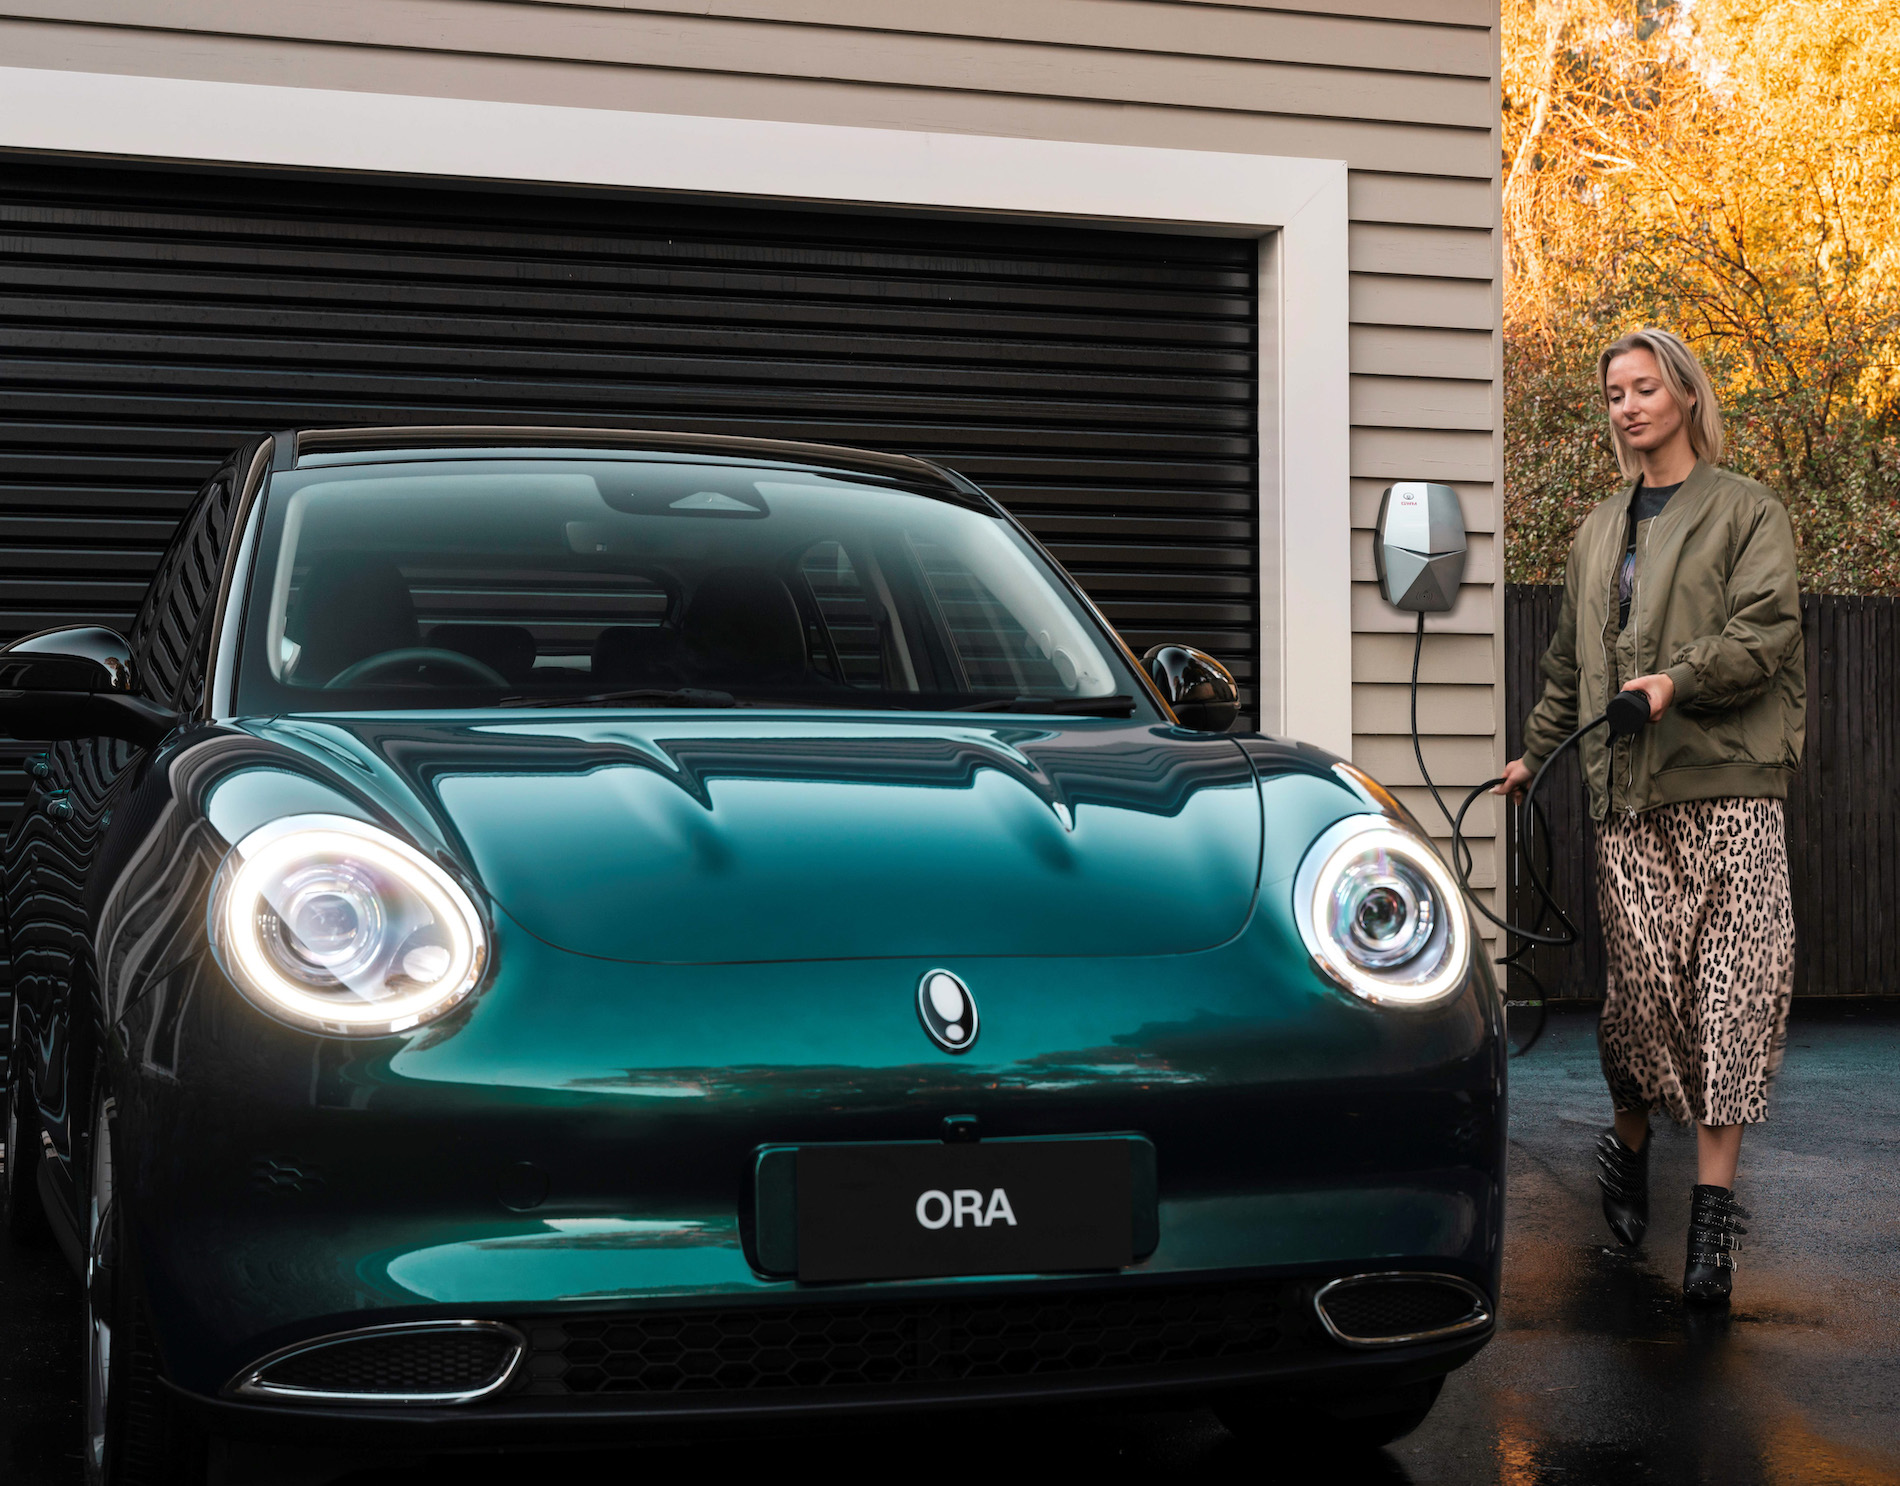 GWM Slashes Prices for Ora EV by $4000, Now Priced from $39,990